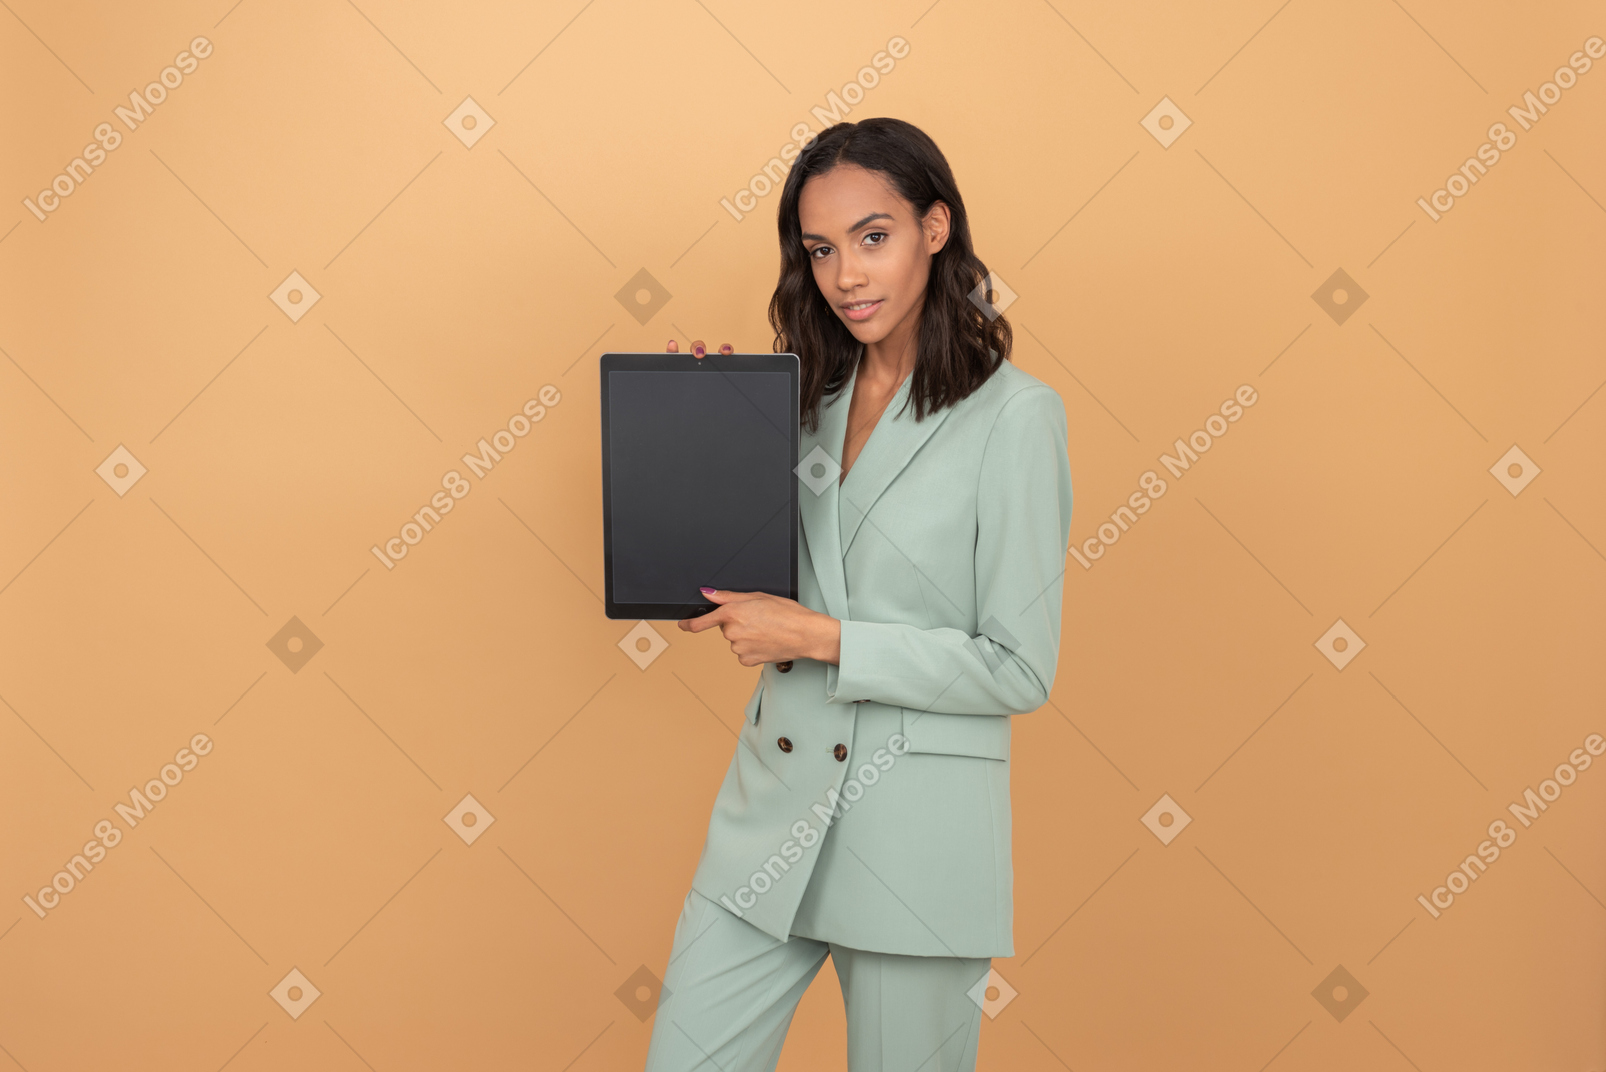 Attractive young woman showing a digital tablet